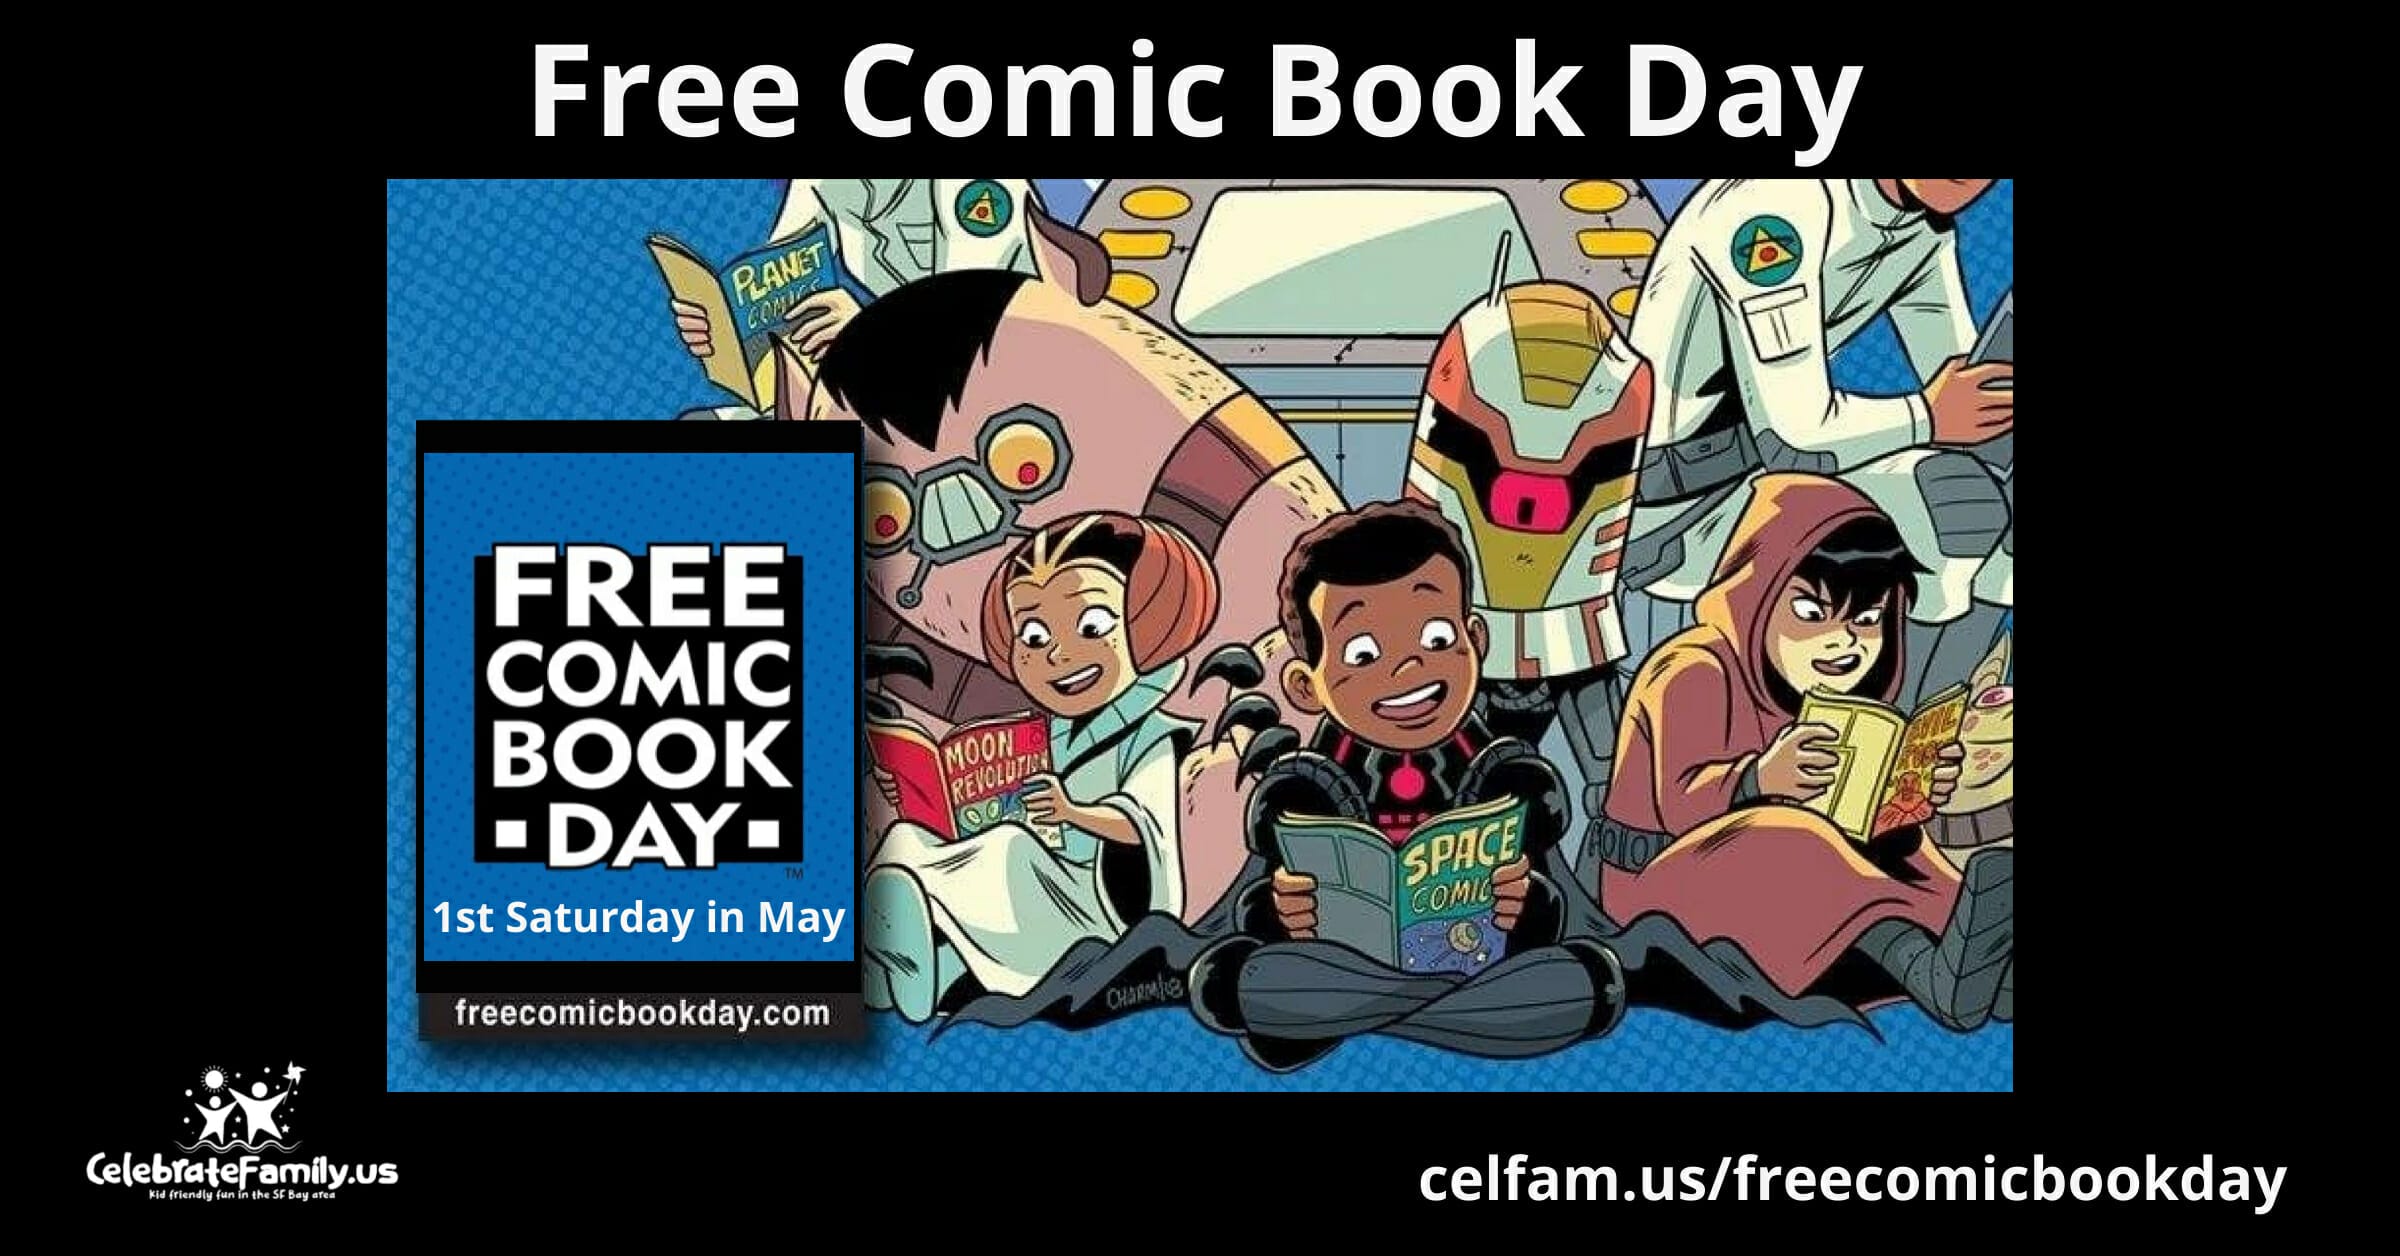 Free Comic Book Day, the first Saturday in May.